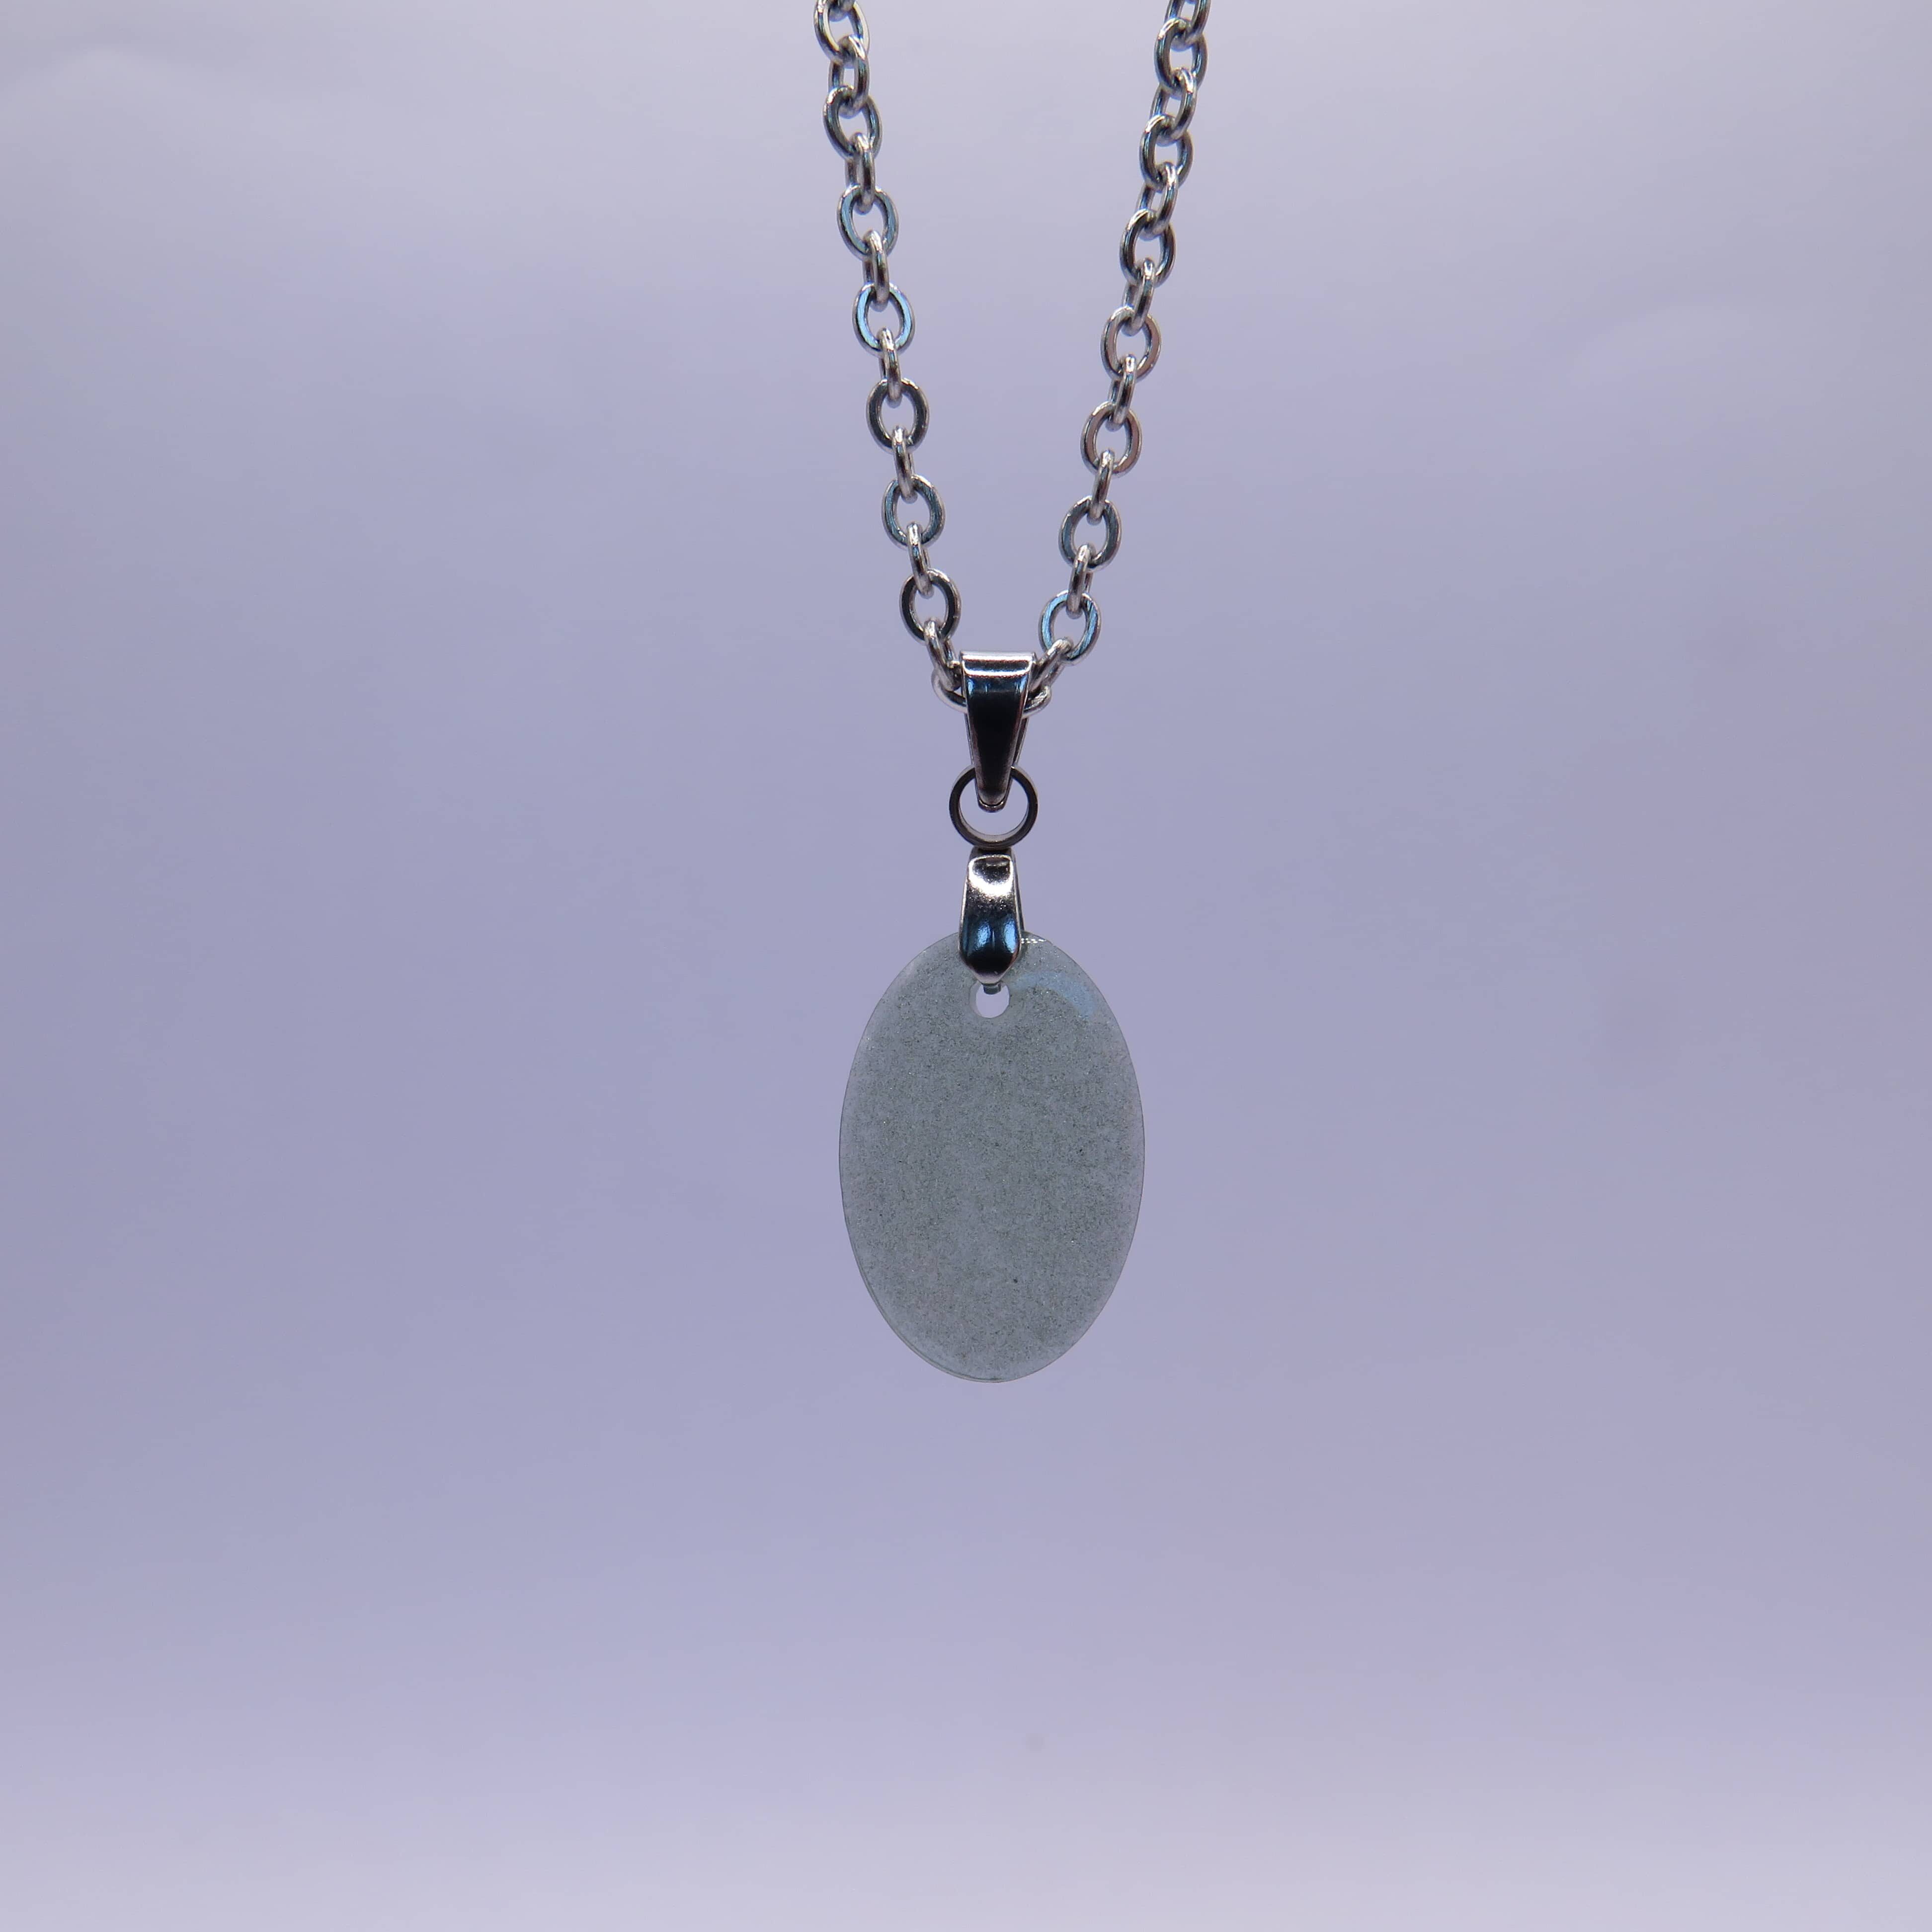 Stainless Steel Green Oval Resin Pendant Necklace